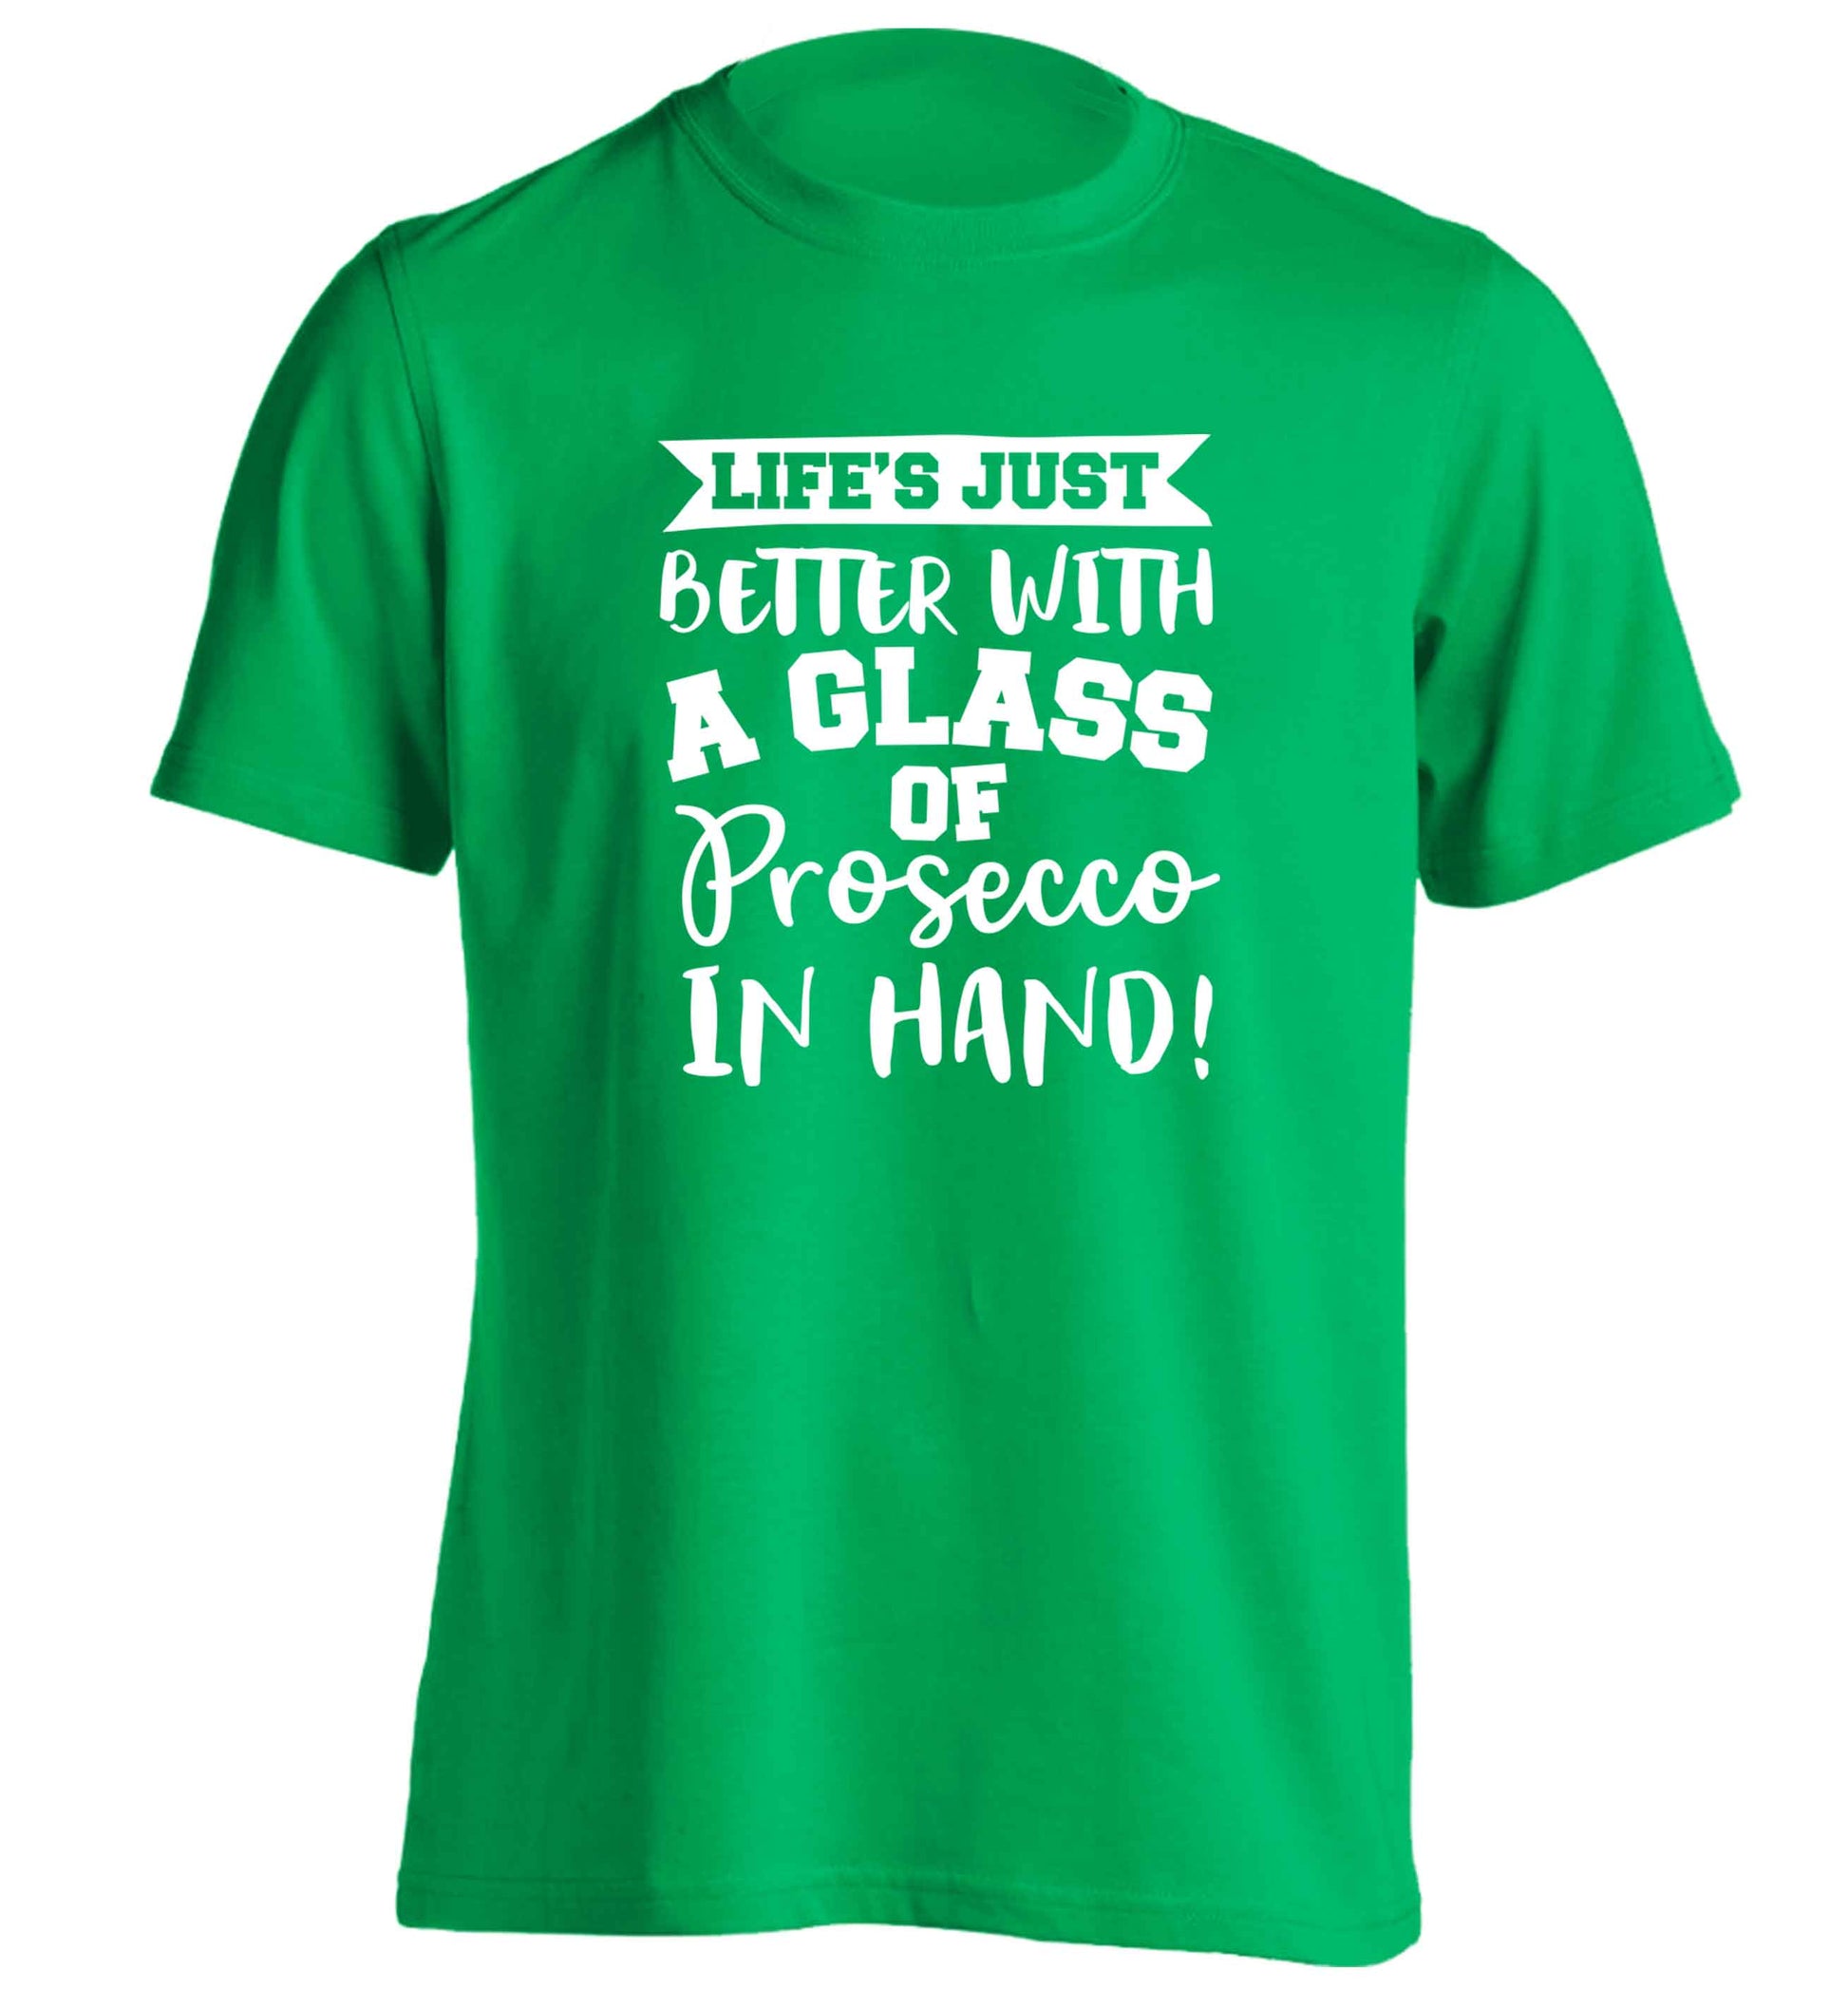 Life's just better with a glass of prosecco in hand adults unisex green Tshirt 2XL